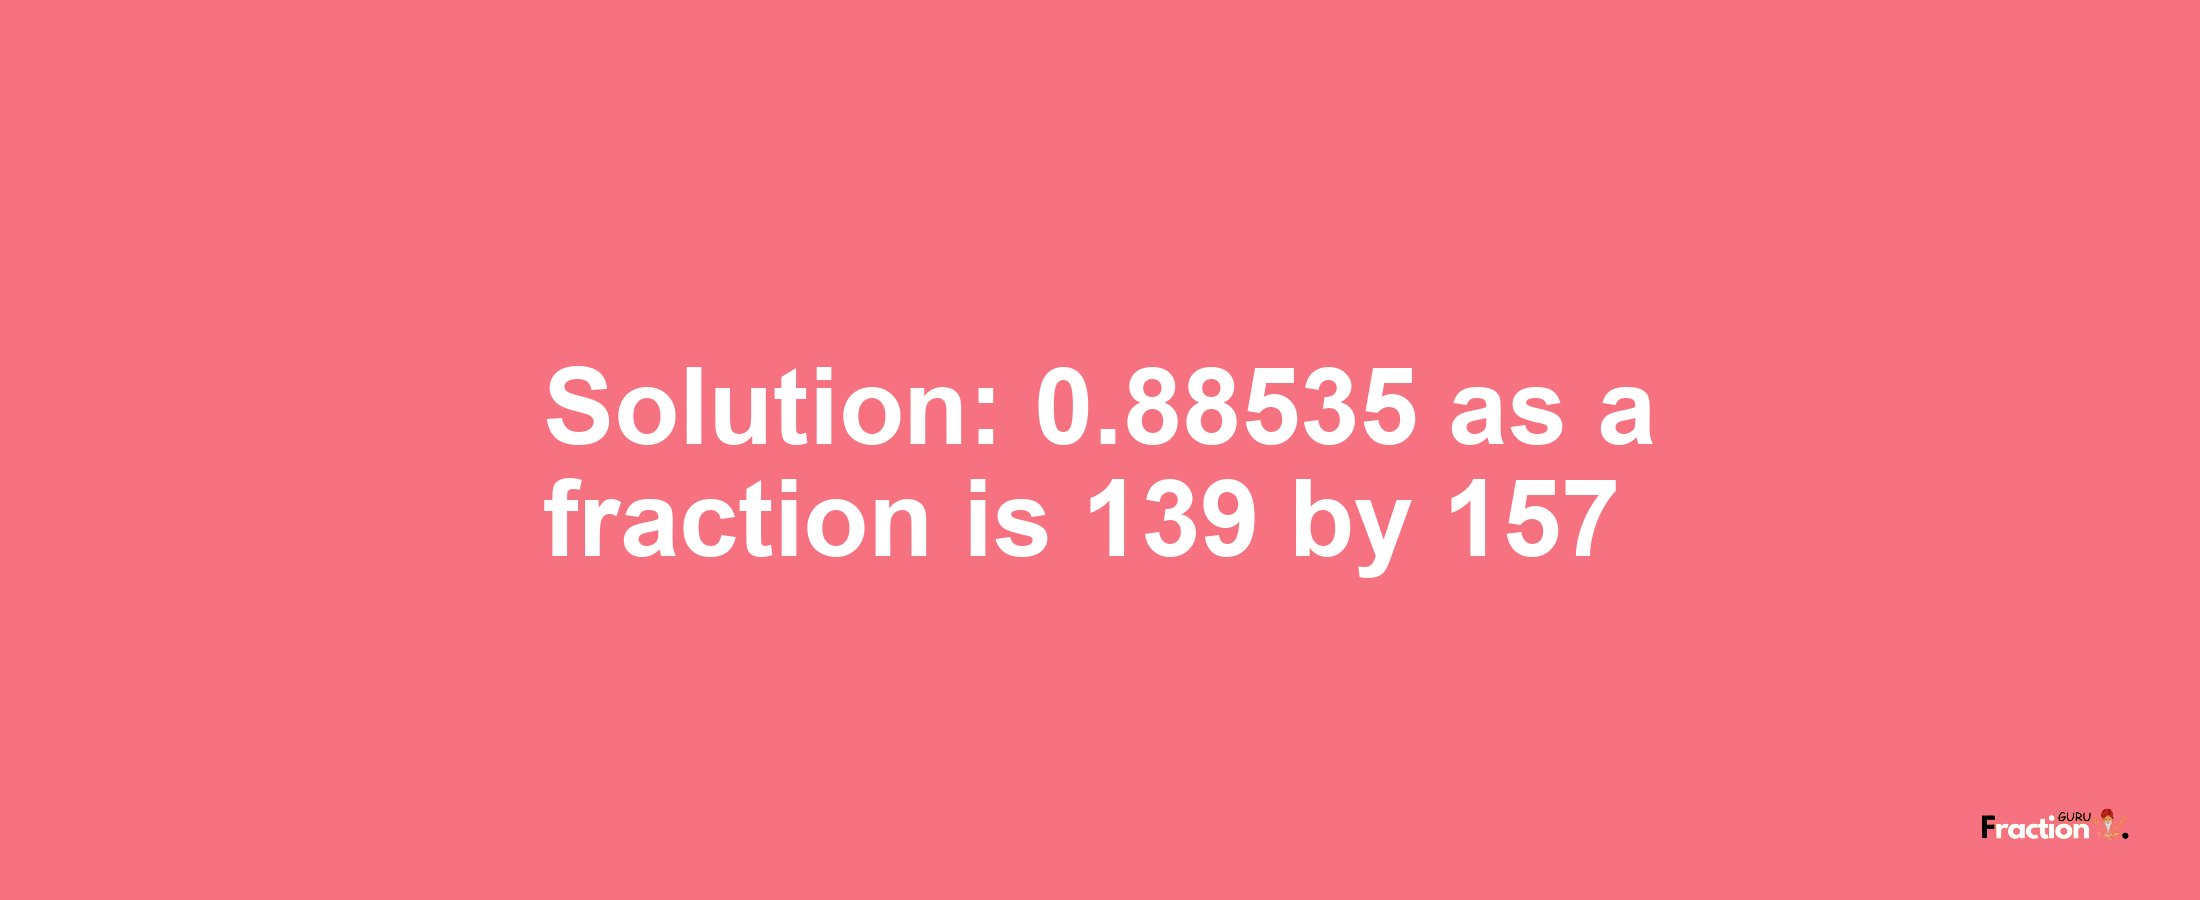 Solution:0.88535 as a fraction is 139/157